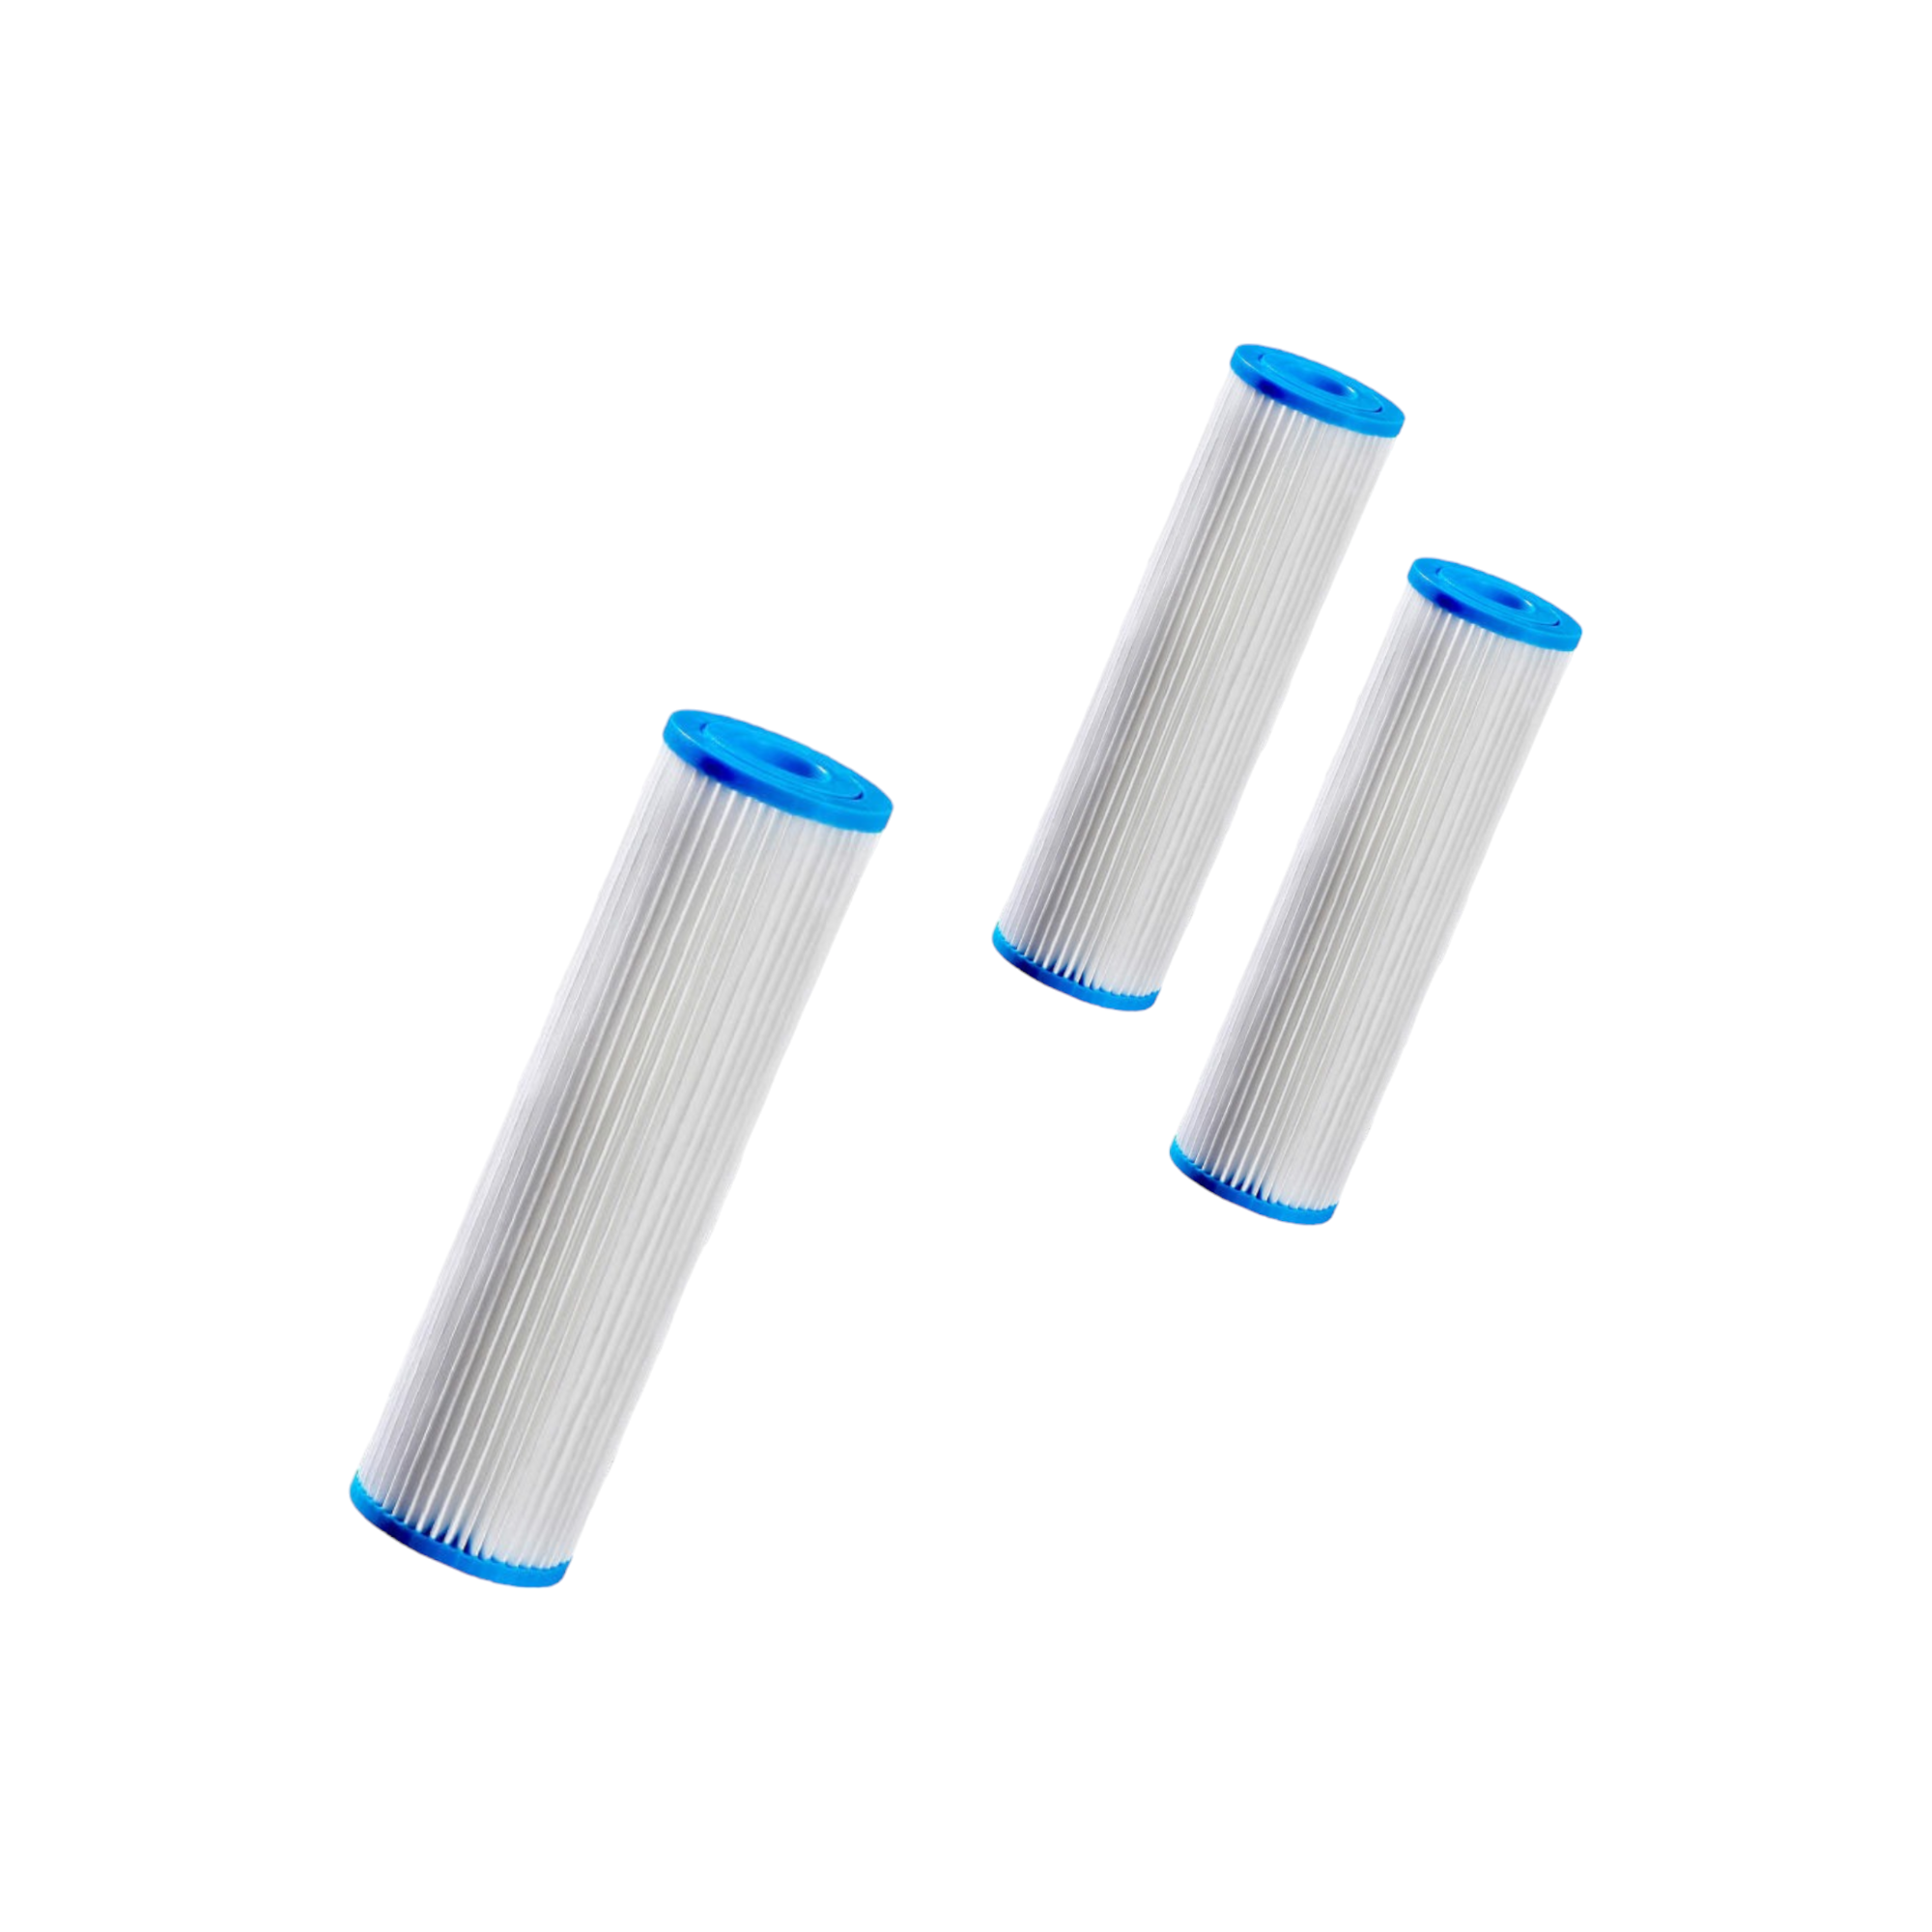 Water Chiller Replacements Filter (3 Filters)